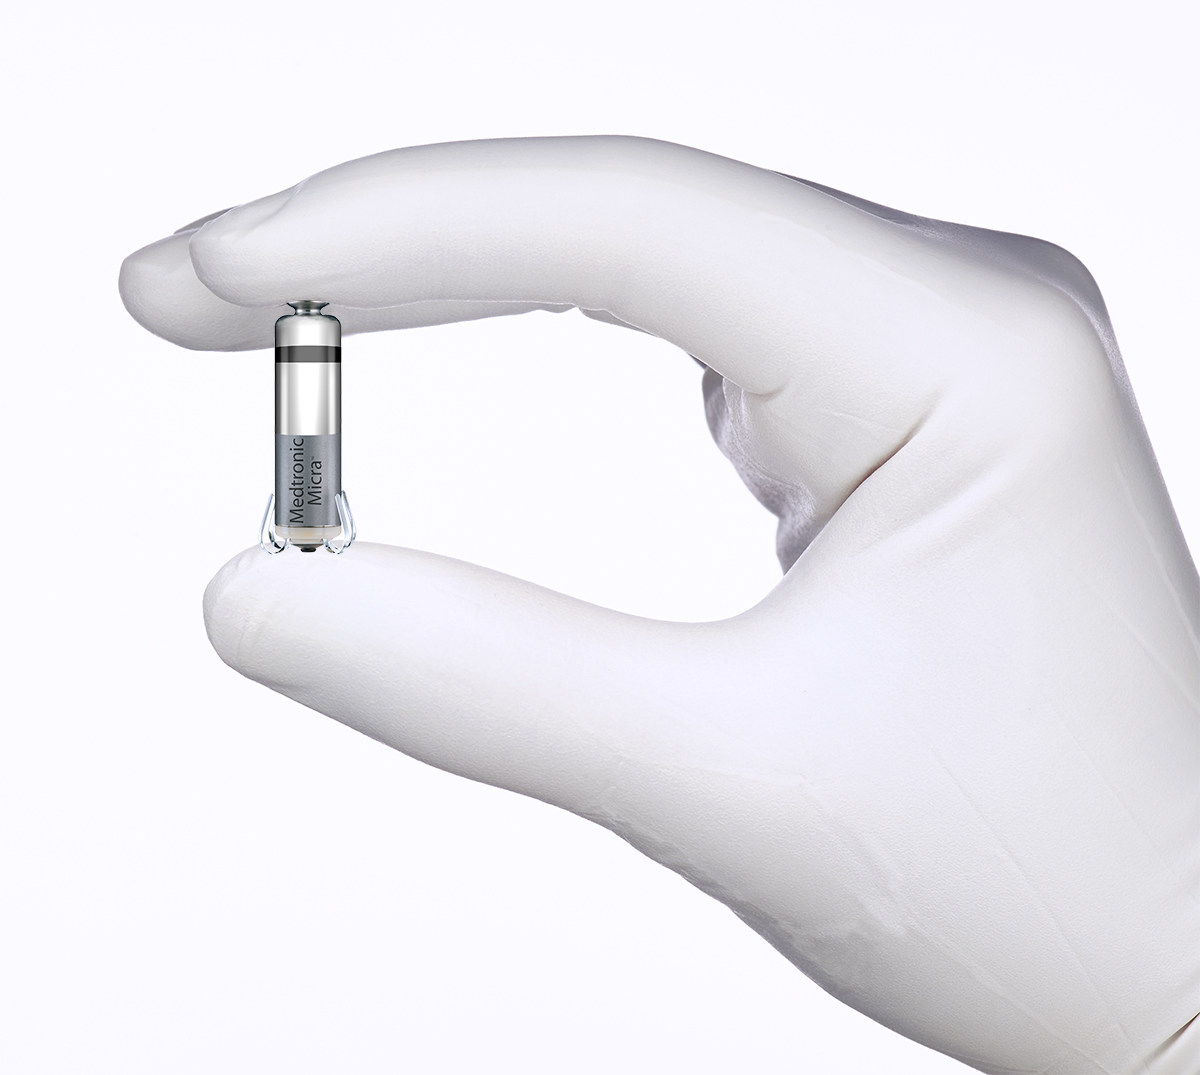 The Medtronic Micra Transcatheter Pacing System is the first leadless pacemaker licenced in Canada and the worlds smallest pacemaker. (CNW Group/Medtronic Canada)